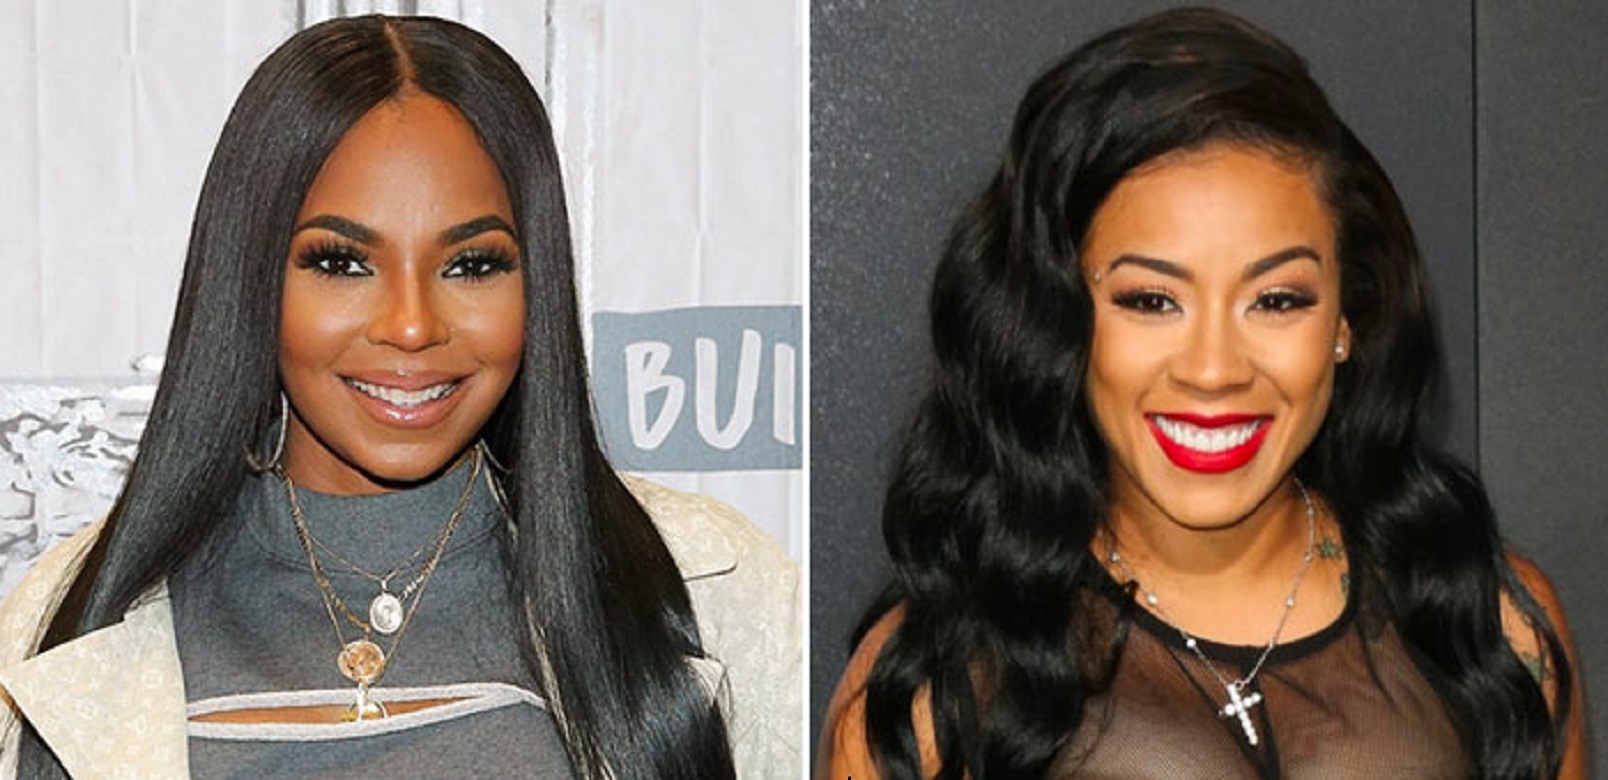 Confirmed: Next Verzuz Battle Will Be Between Ashanti and Keyshia Cole